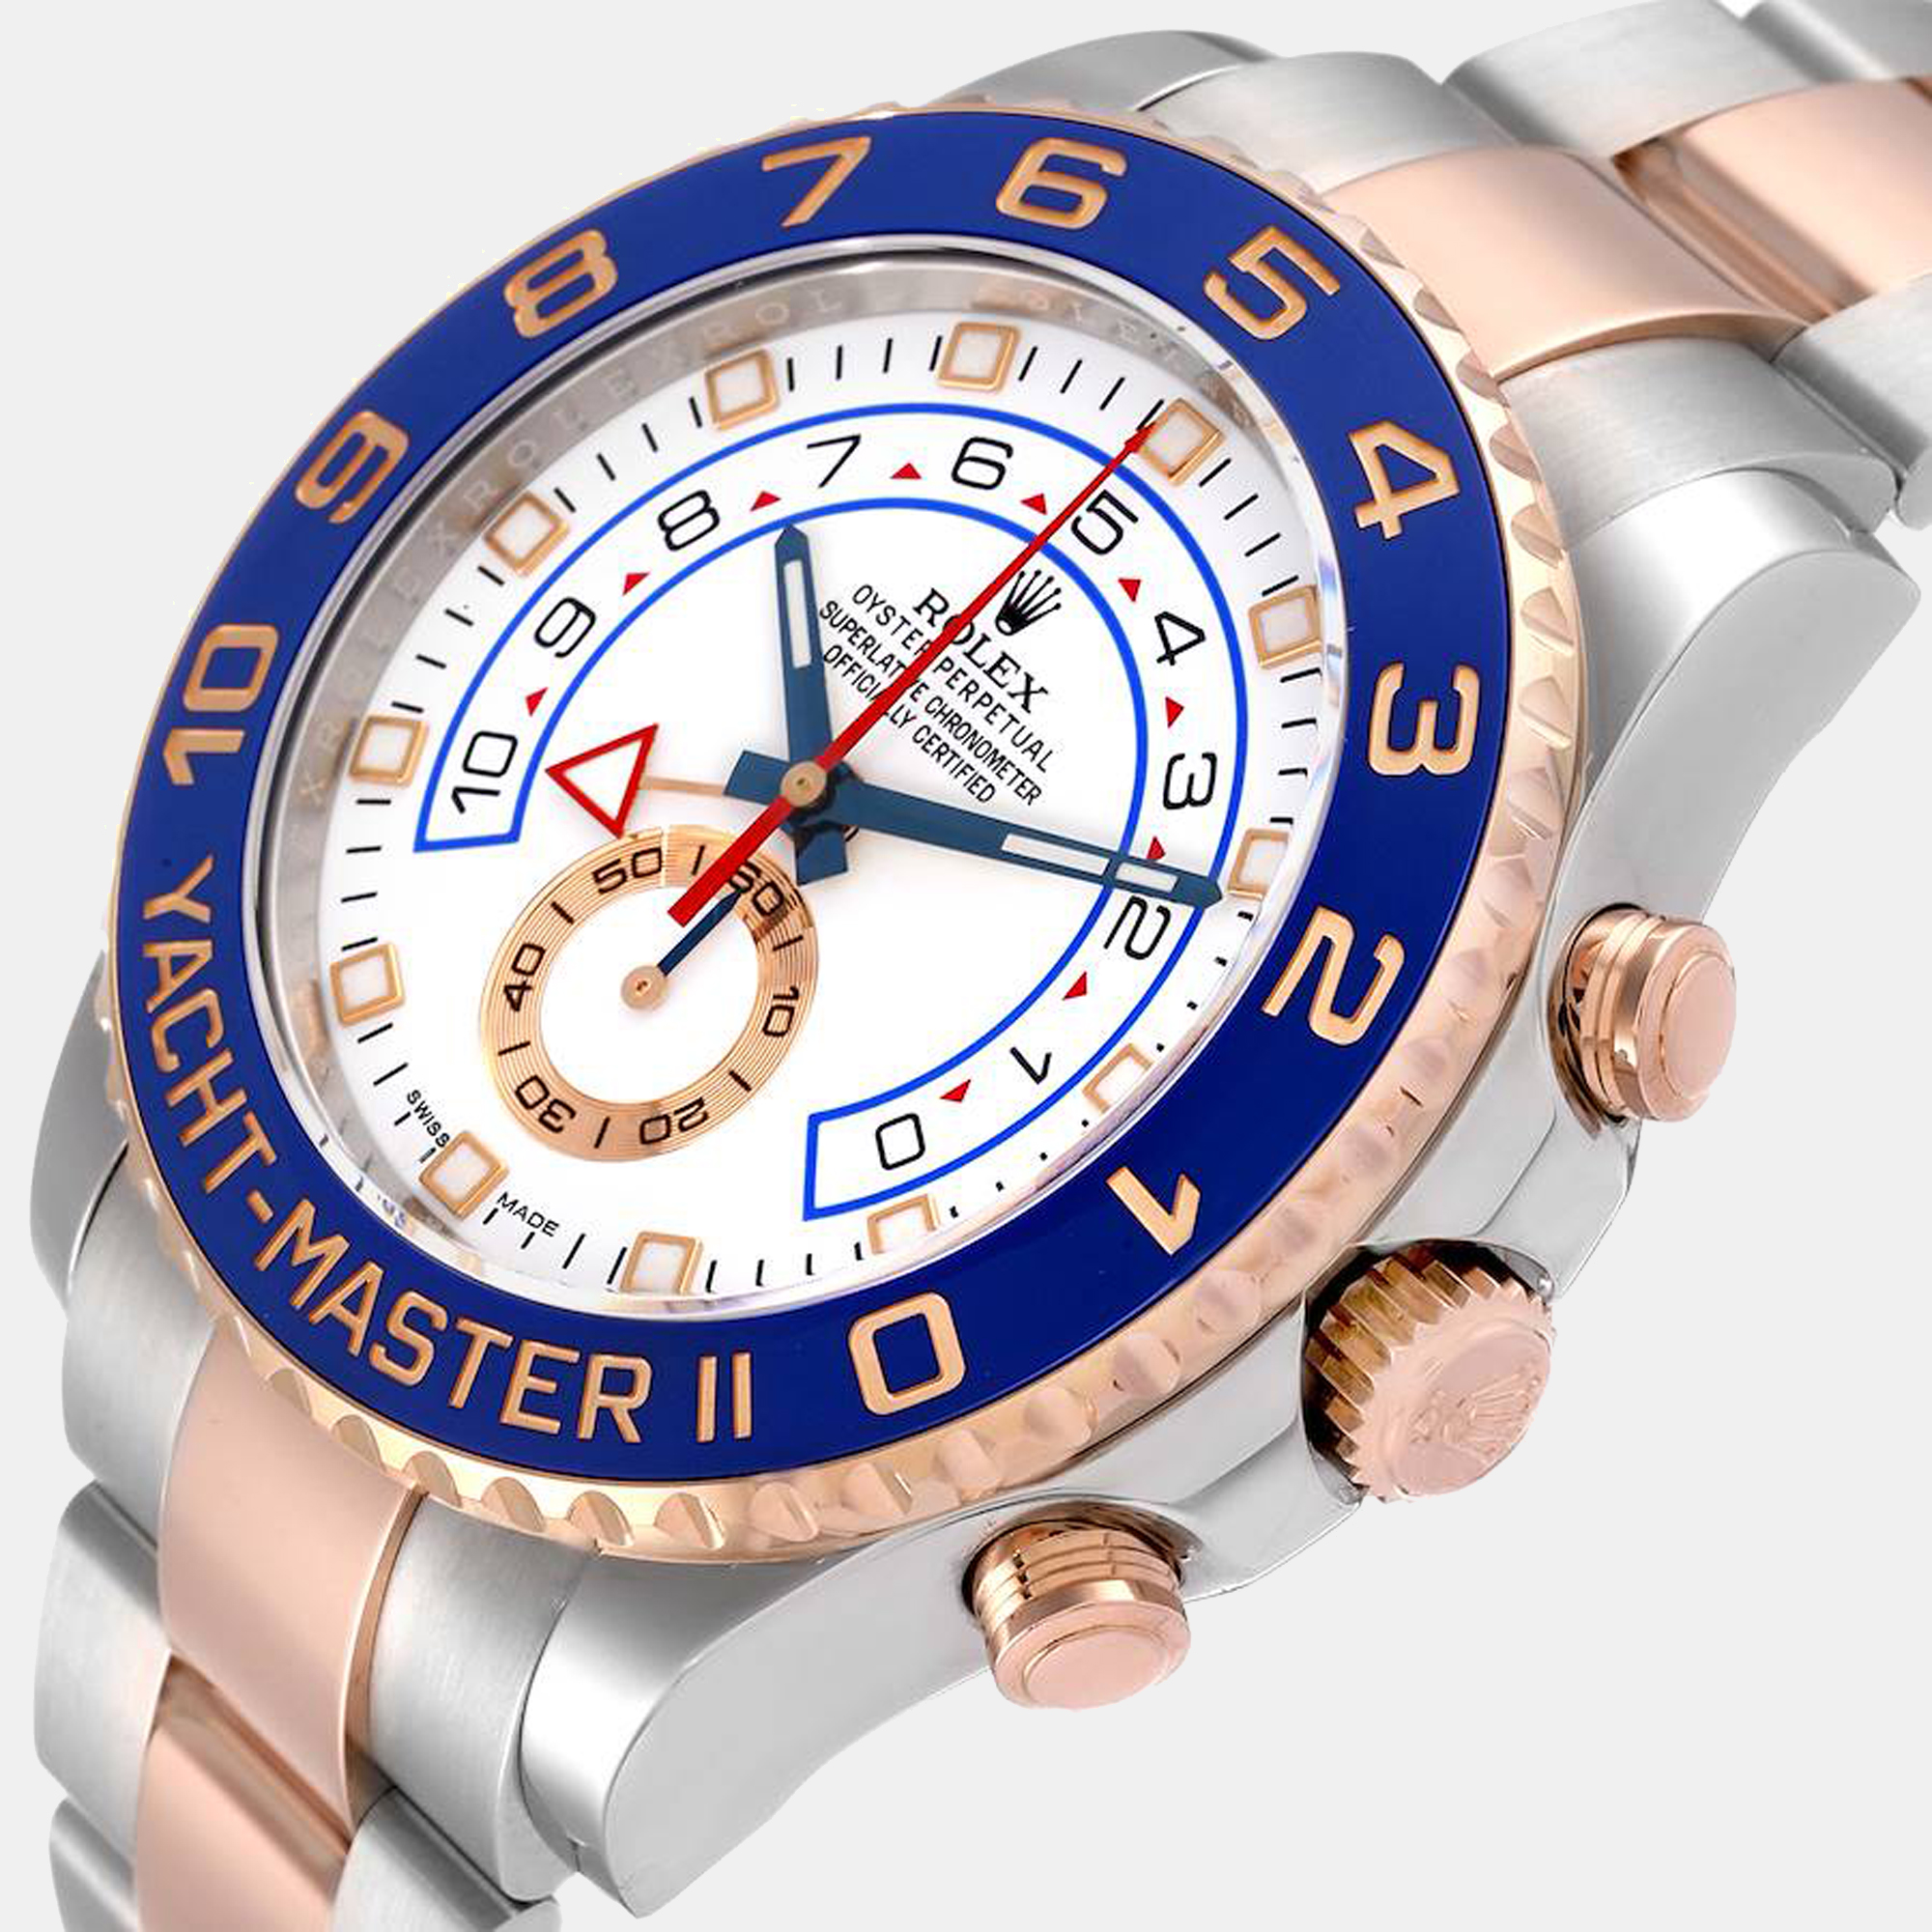 

Rolex White 18K Rose Gold And Stainless Steel Yacht-Master 116681 Automatic Men's Wristwatch 44 mm